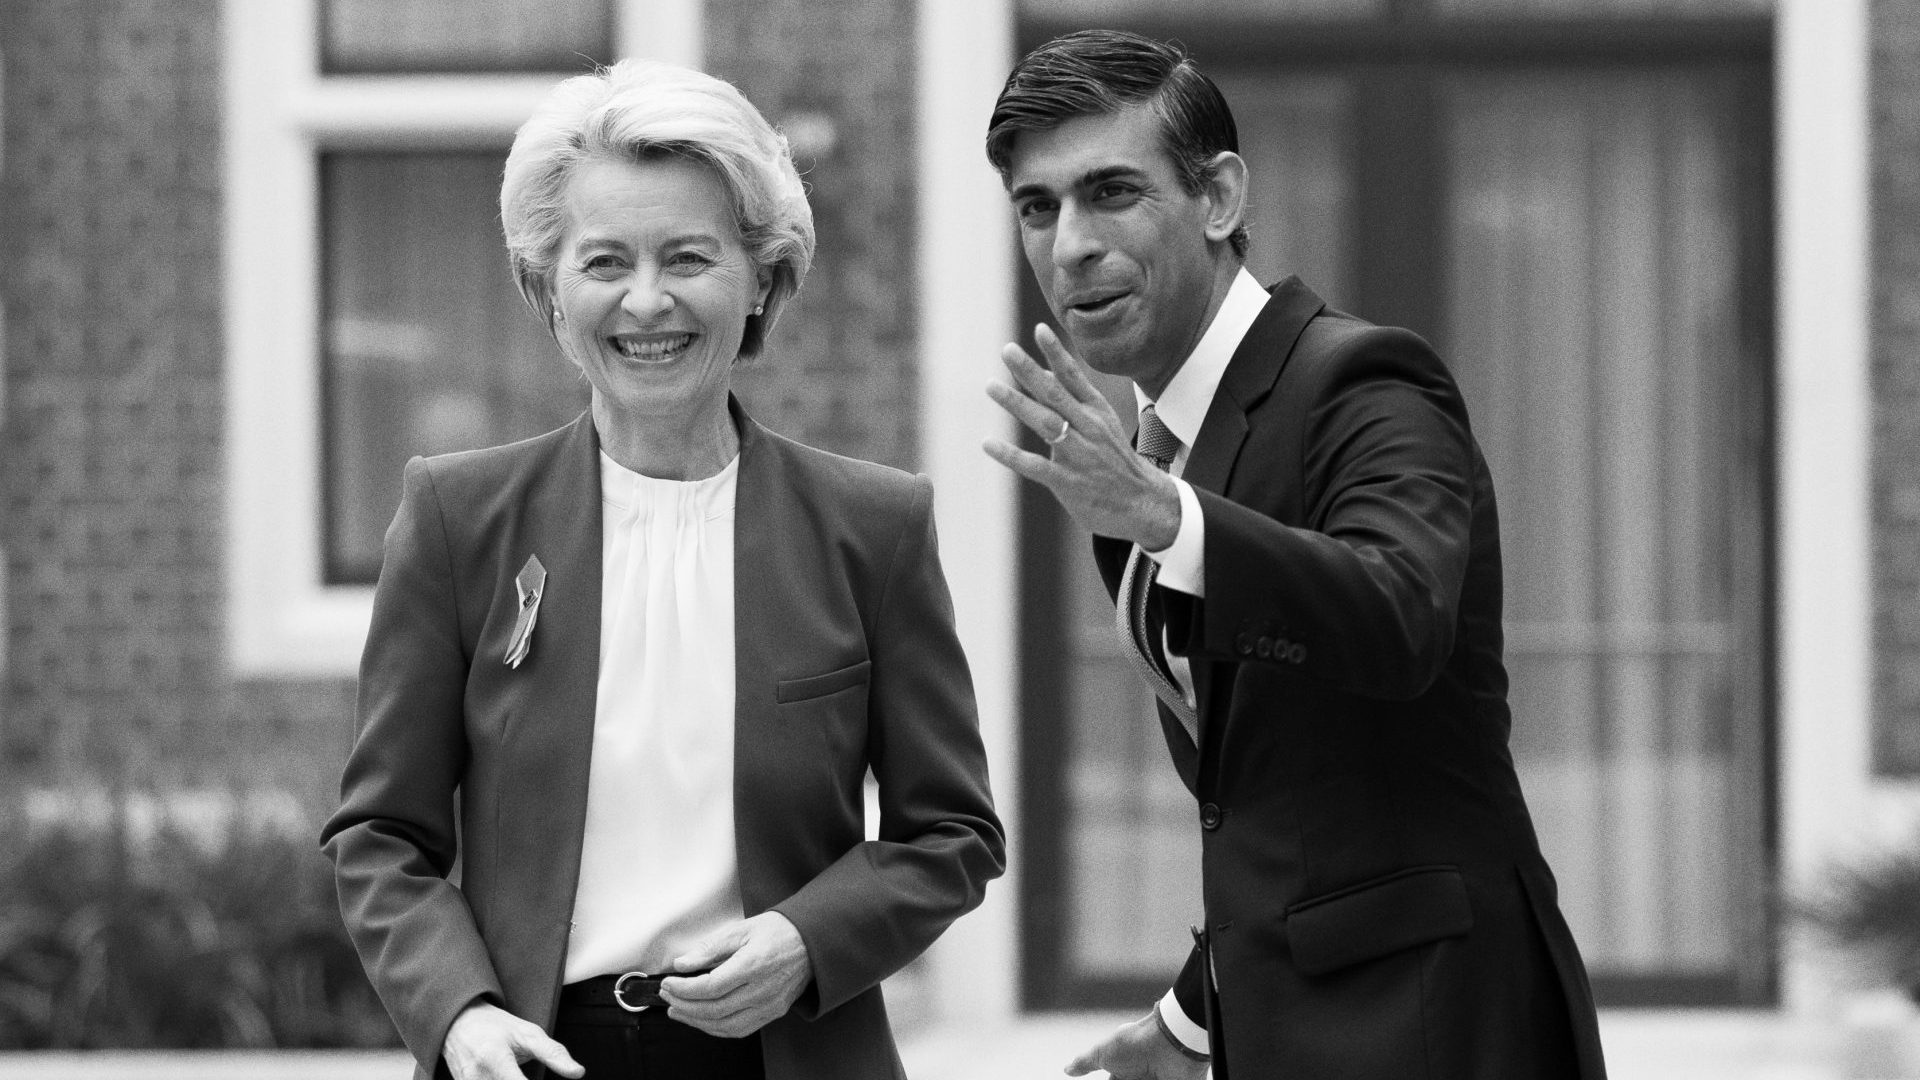 Rishi Sunak greets Ursula von der Leyen in Windsor prior to the announcement of a new UK-EU deal on post-Brexit trade arrangements for Northern Ireland. Photo: Dan Kitwood/WPA Pool/Getty